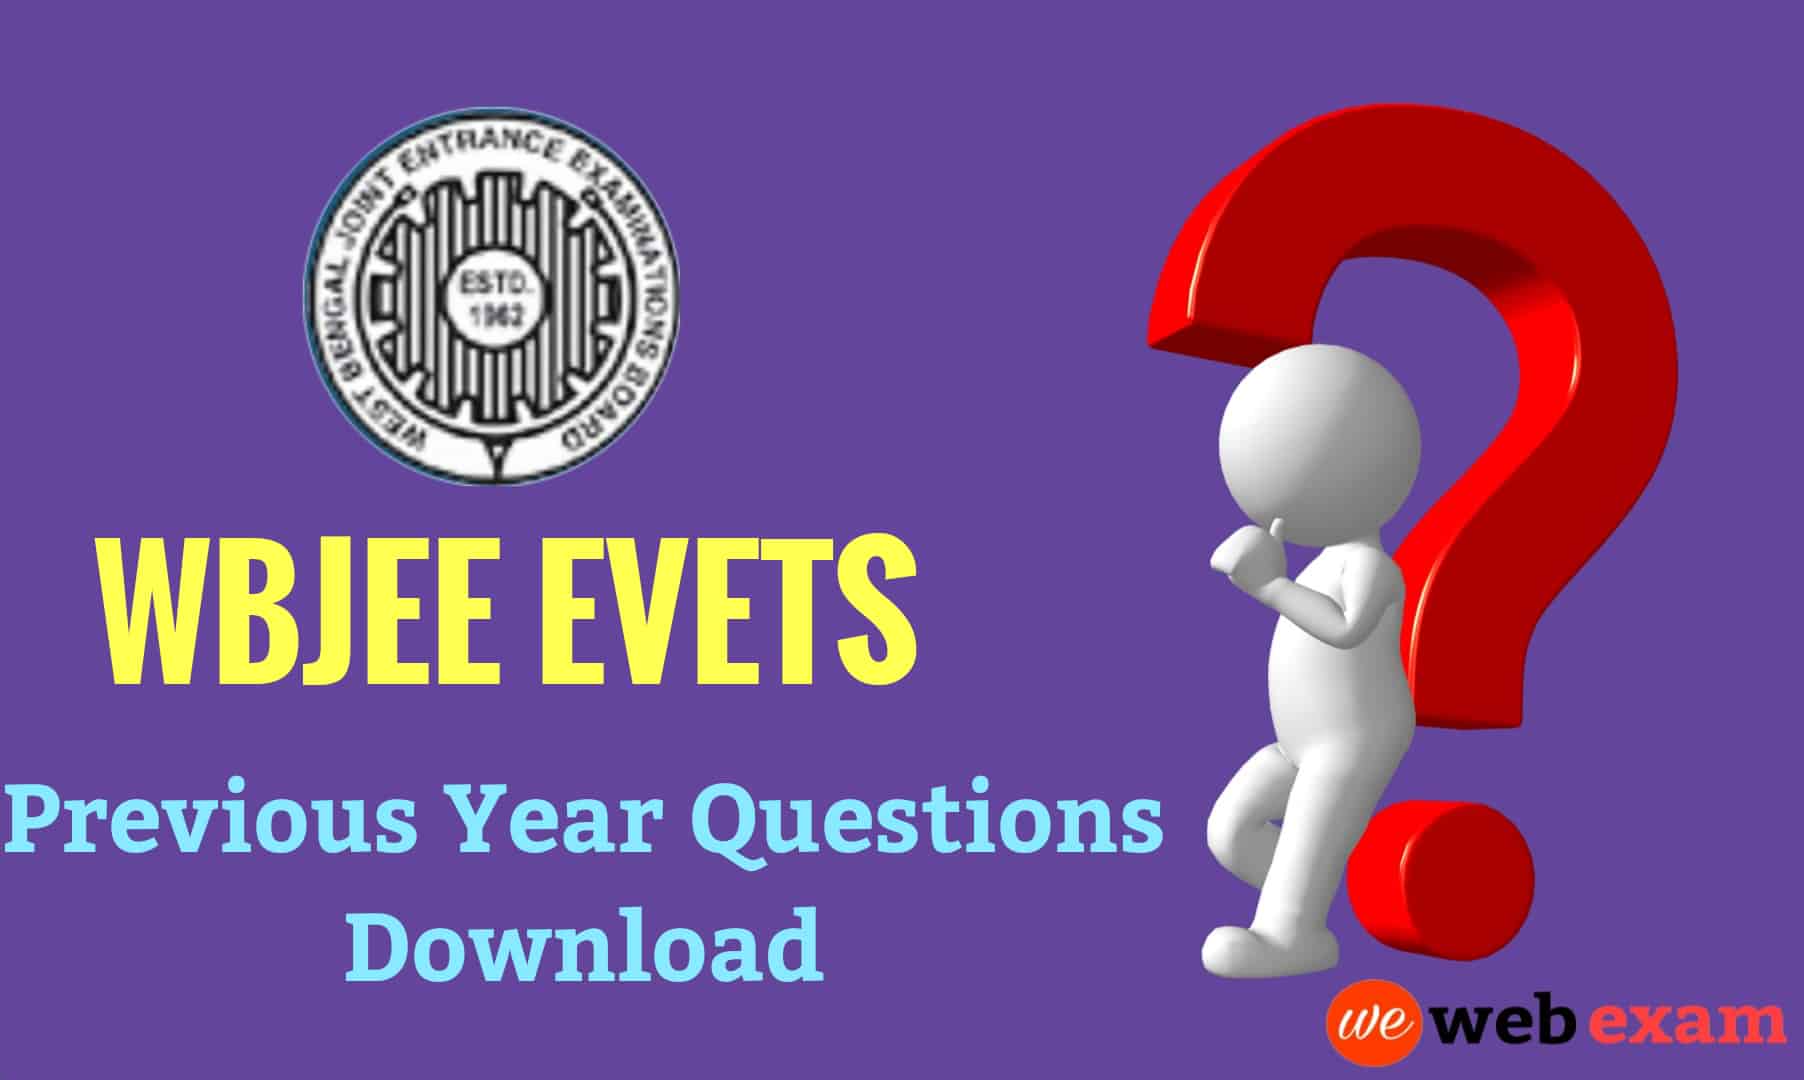 EVETS Previous Year Question Paper Download